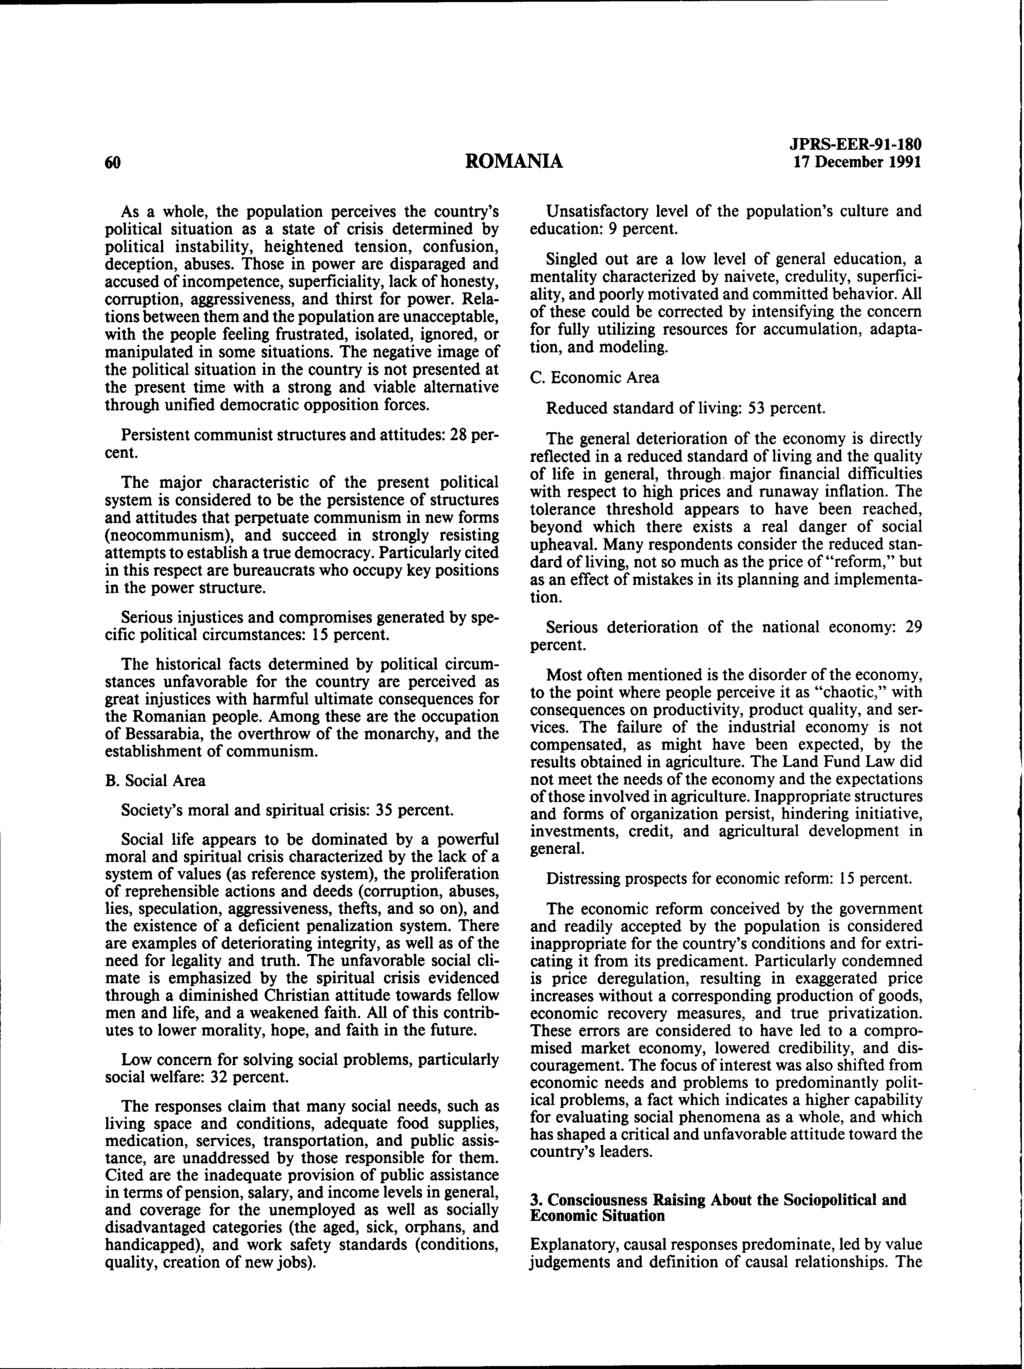 60 ROMANIA JPRS-EER-91-180 17 December 1991 As a whole, the population perceives the country's political situation as a state of crisis determined by political instability, heightened tension,